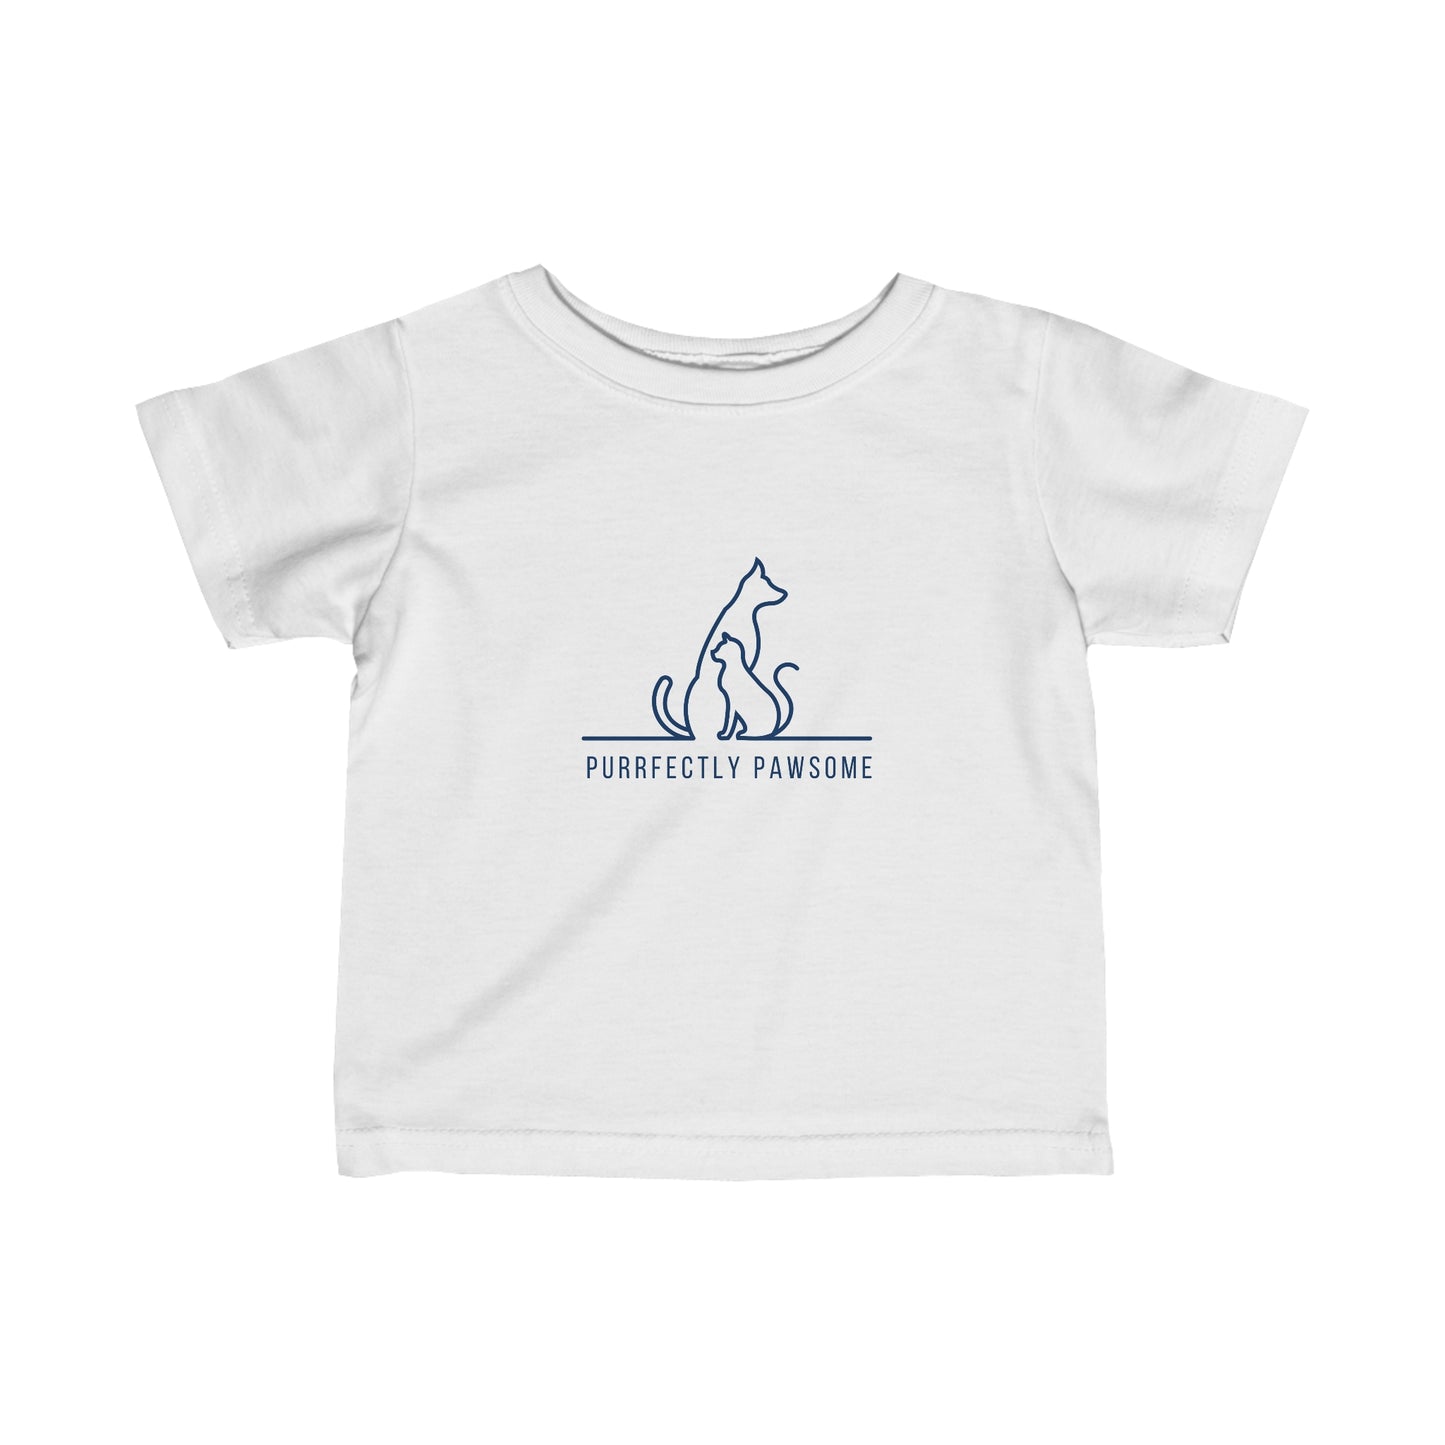 Purrfectly Pawsome Dog an Cat Silhouette. Infant Fine Jersey Tee